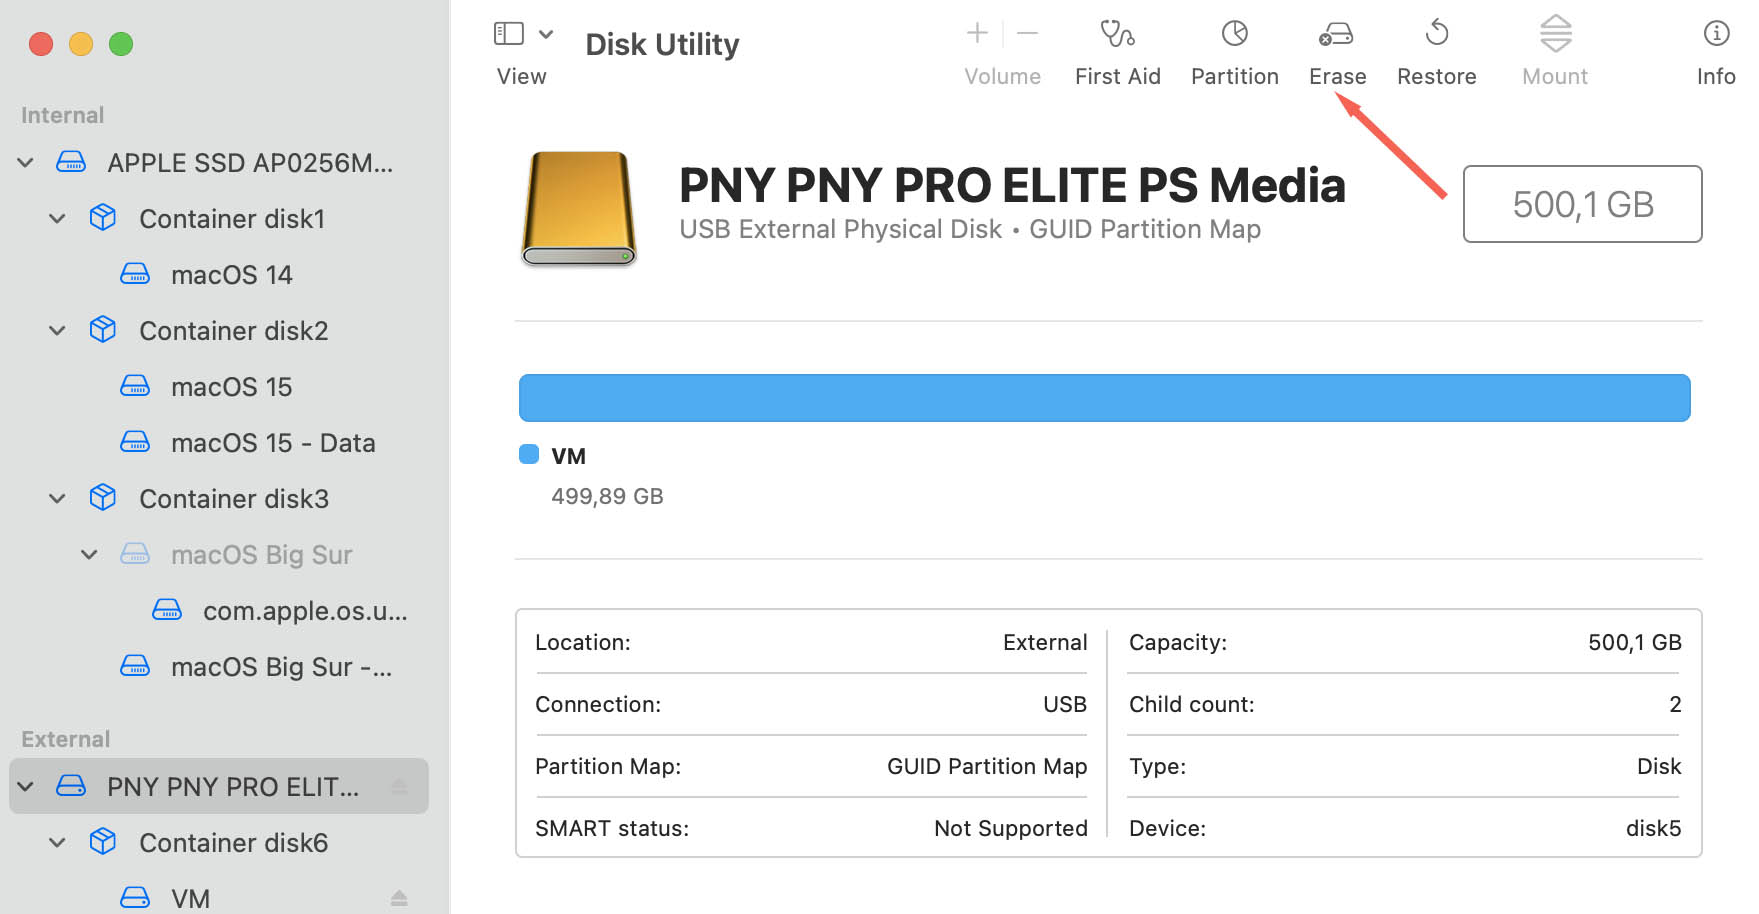 erase your drive with disk utility